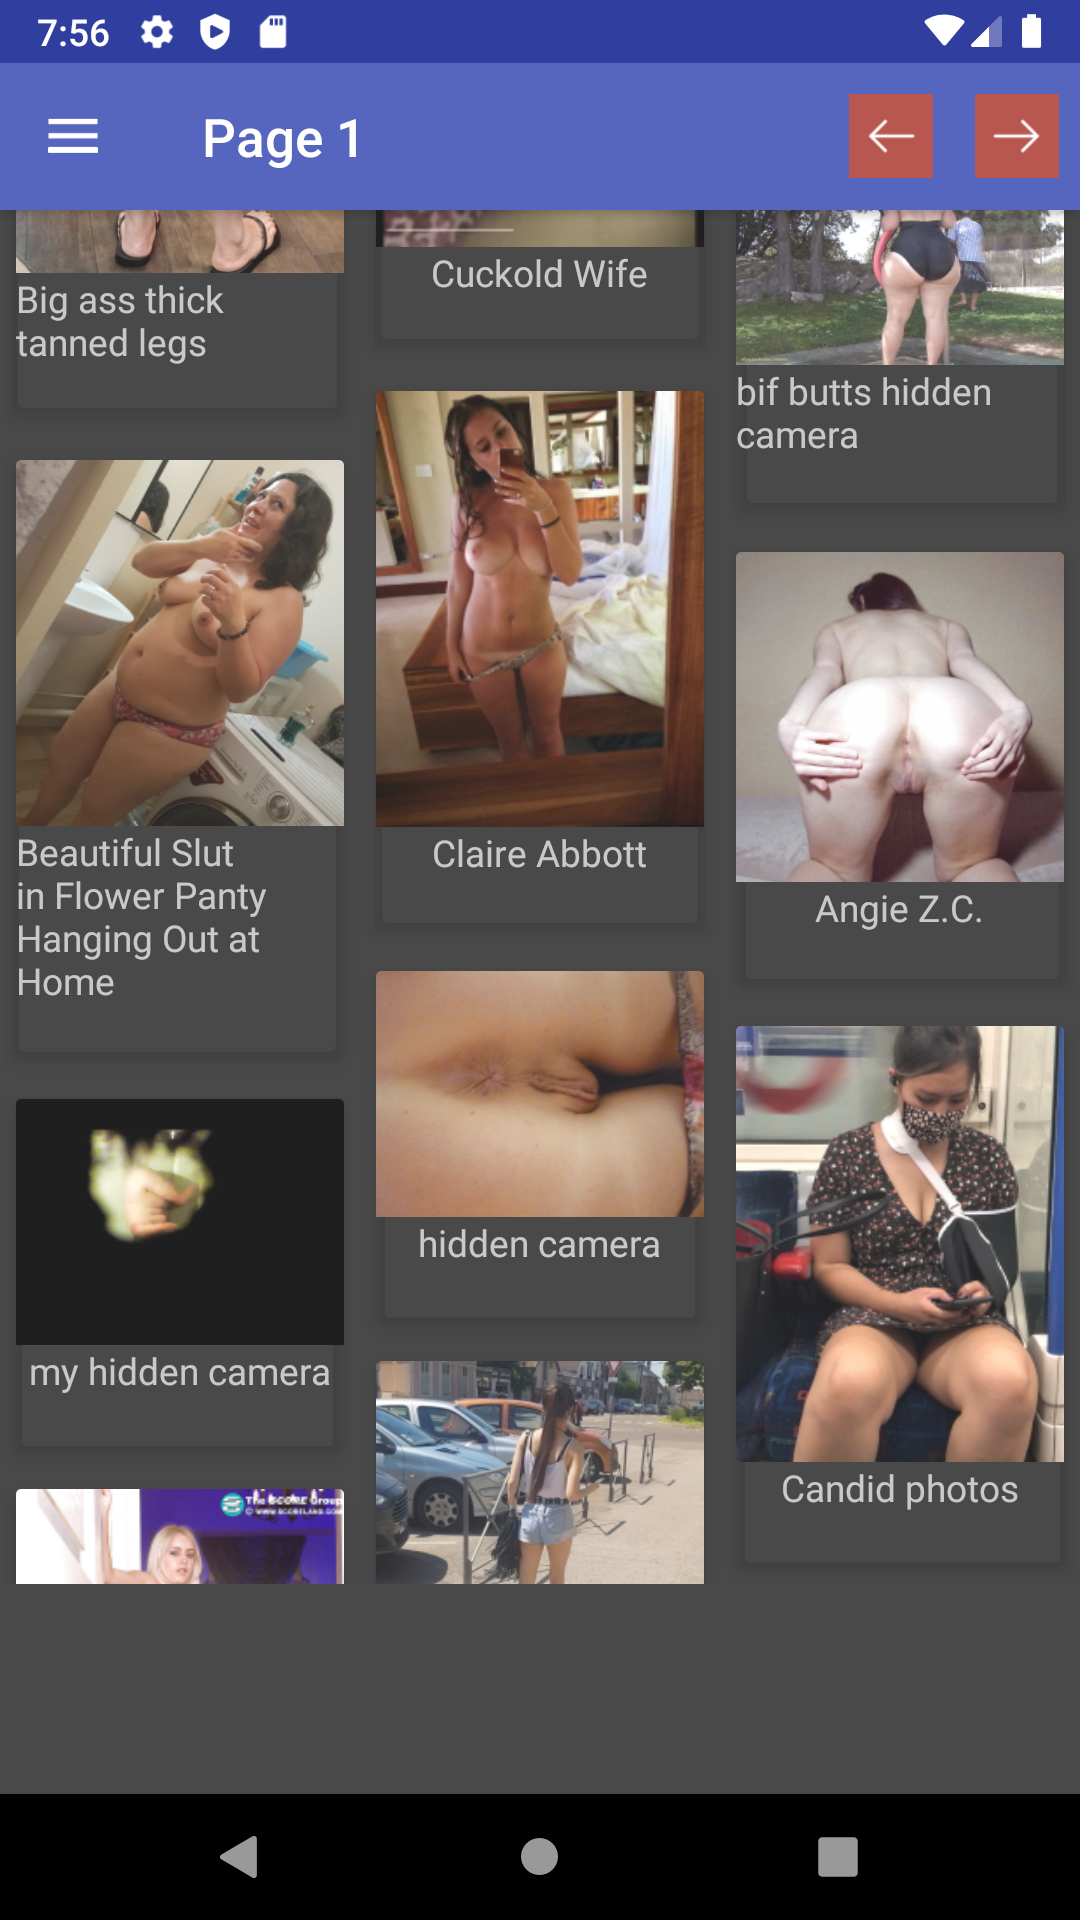 Hidden Camera Porn pic,hentia,topless,lair,daily,blowbang,for,titty,porn,hentai,sexy,collection,apk,anime,pornstars,galleries,adult,apps,wallpapers,app,gallery,mythras,hot